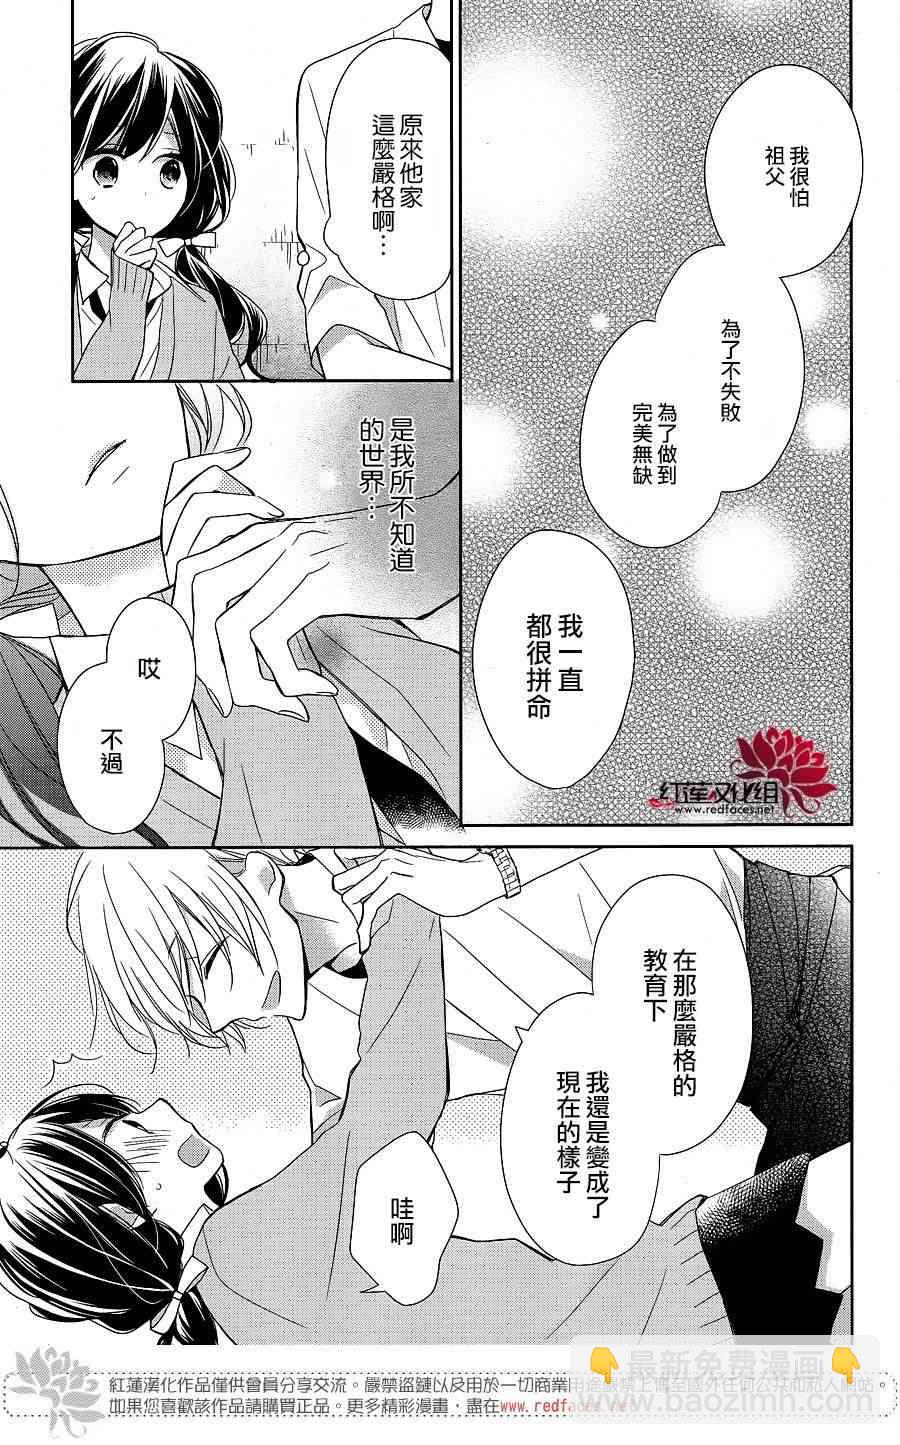 If given a second chance - 8話 - 3